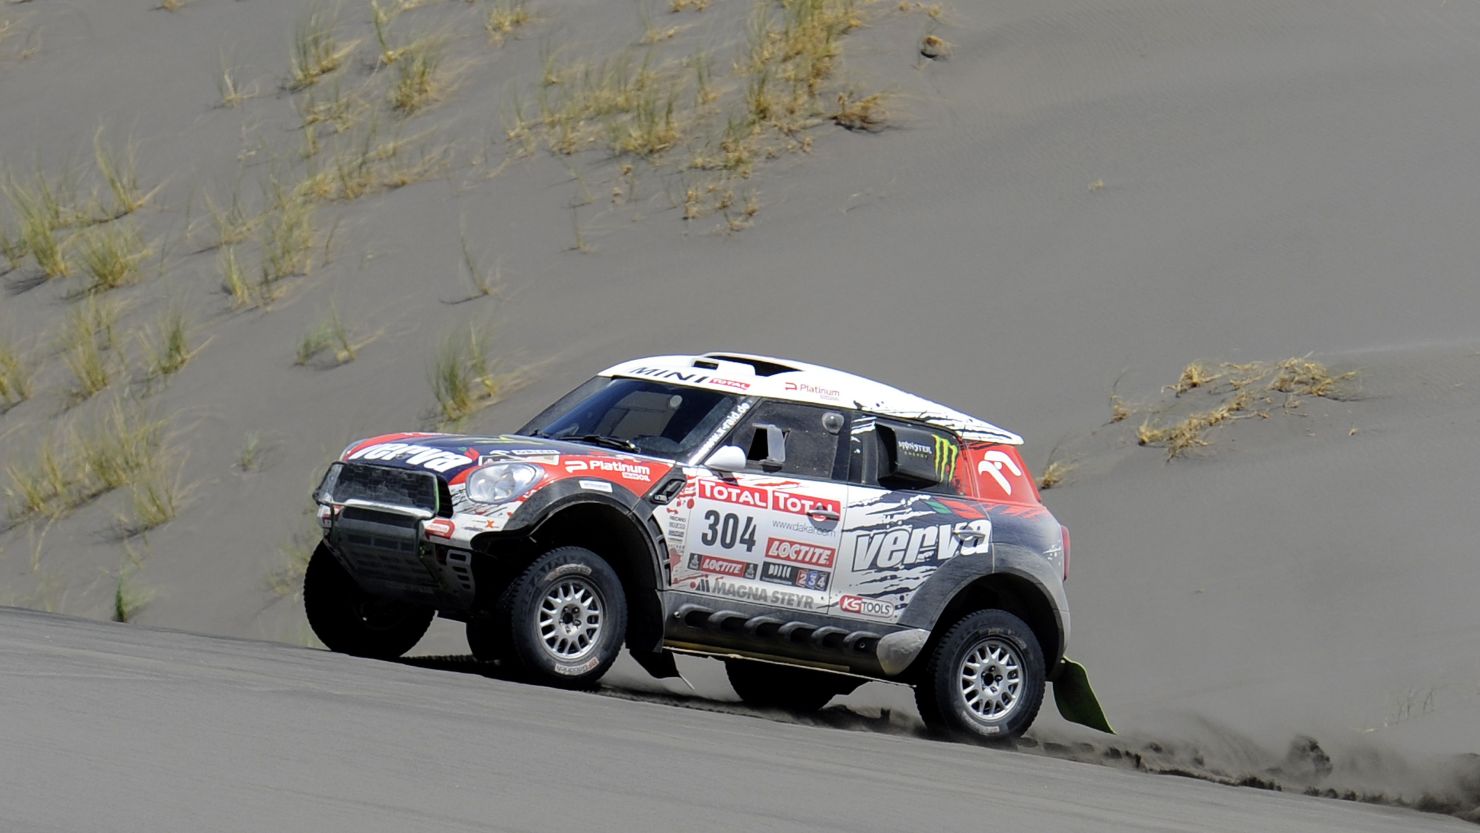 Krzysztof Holowczyc of Poland takes his Mini to second place on stage three of the Dakar Rally to take the overall lead.